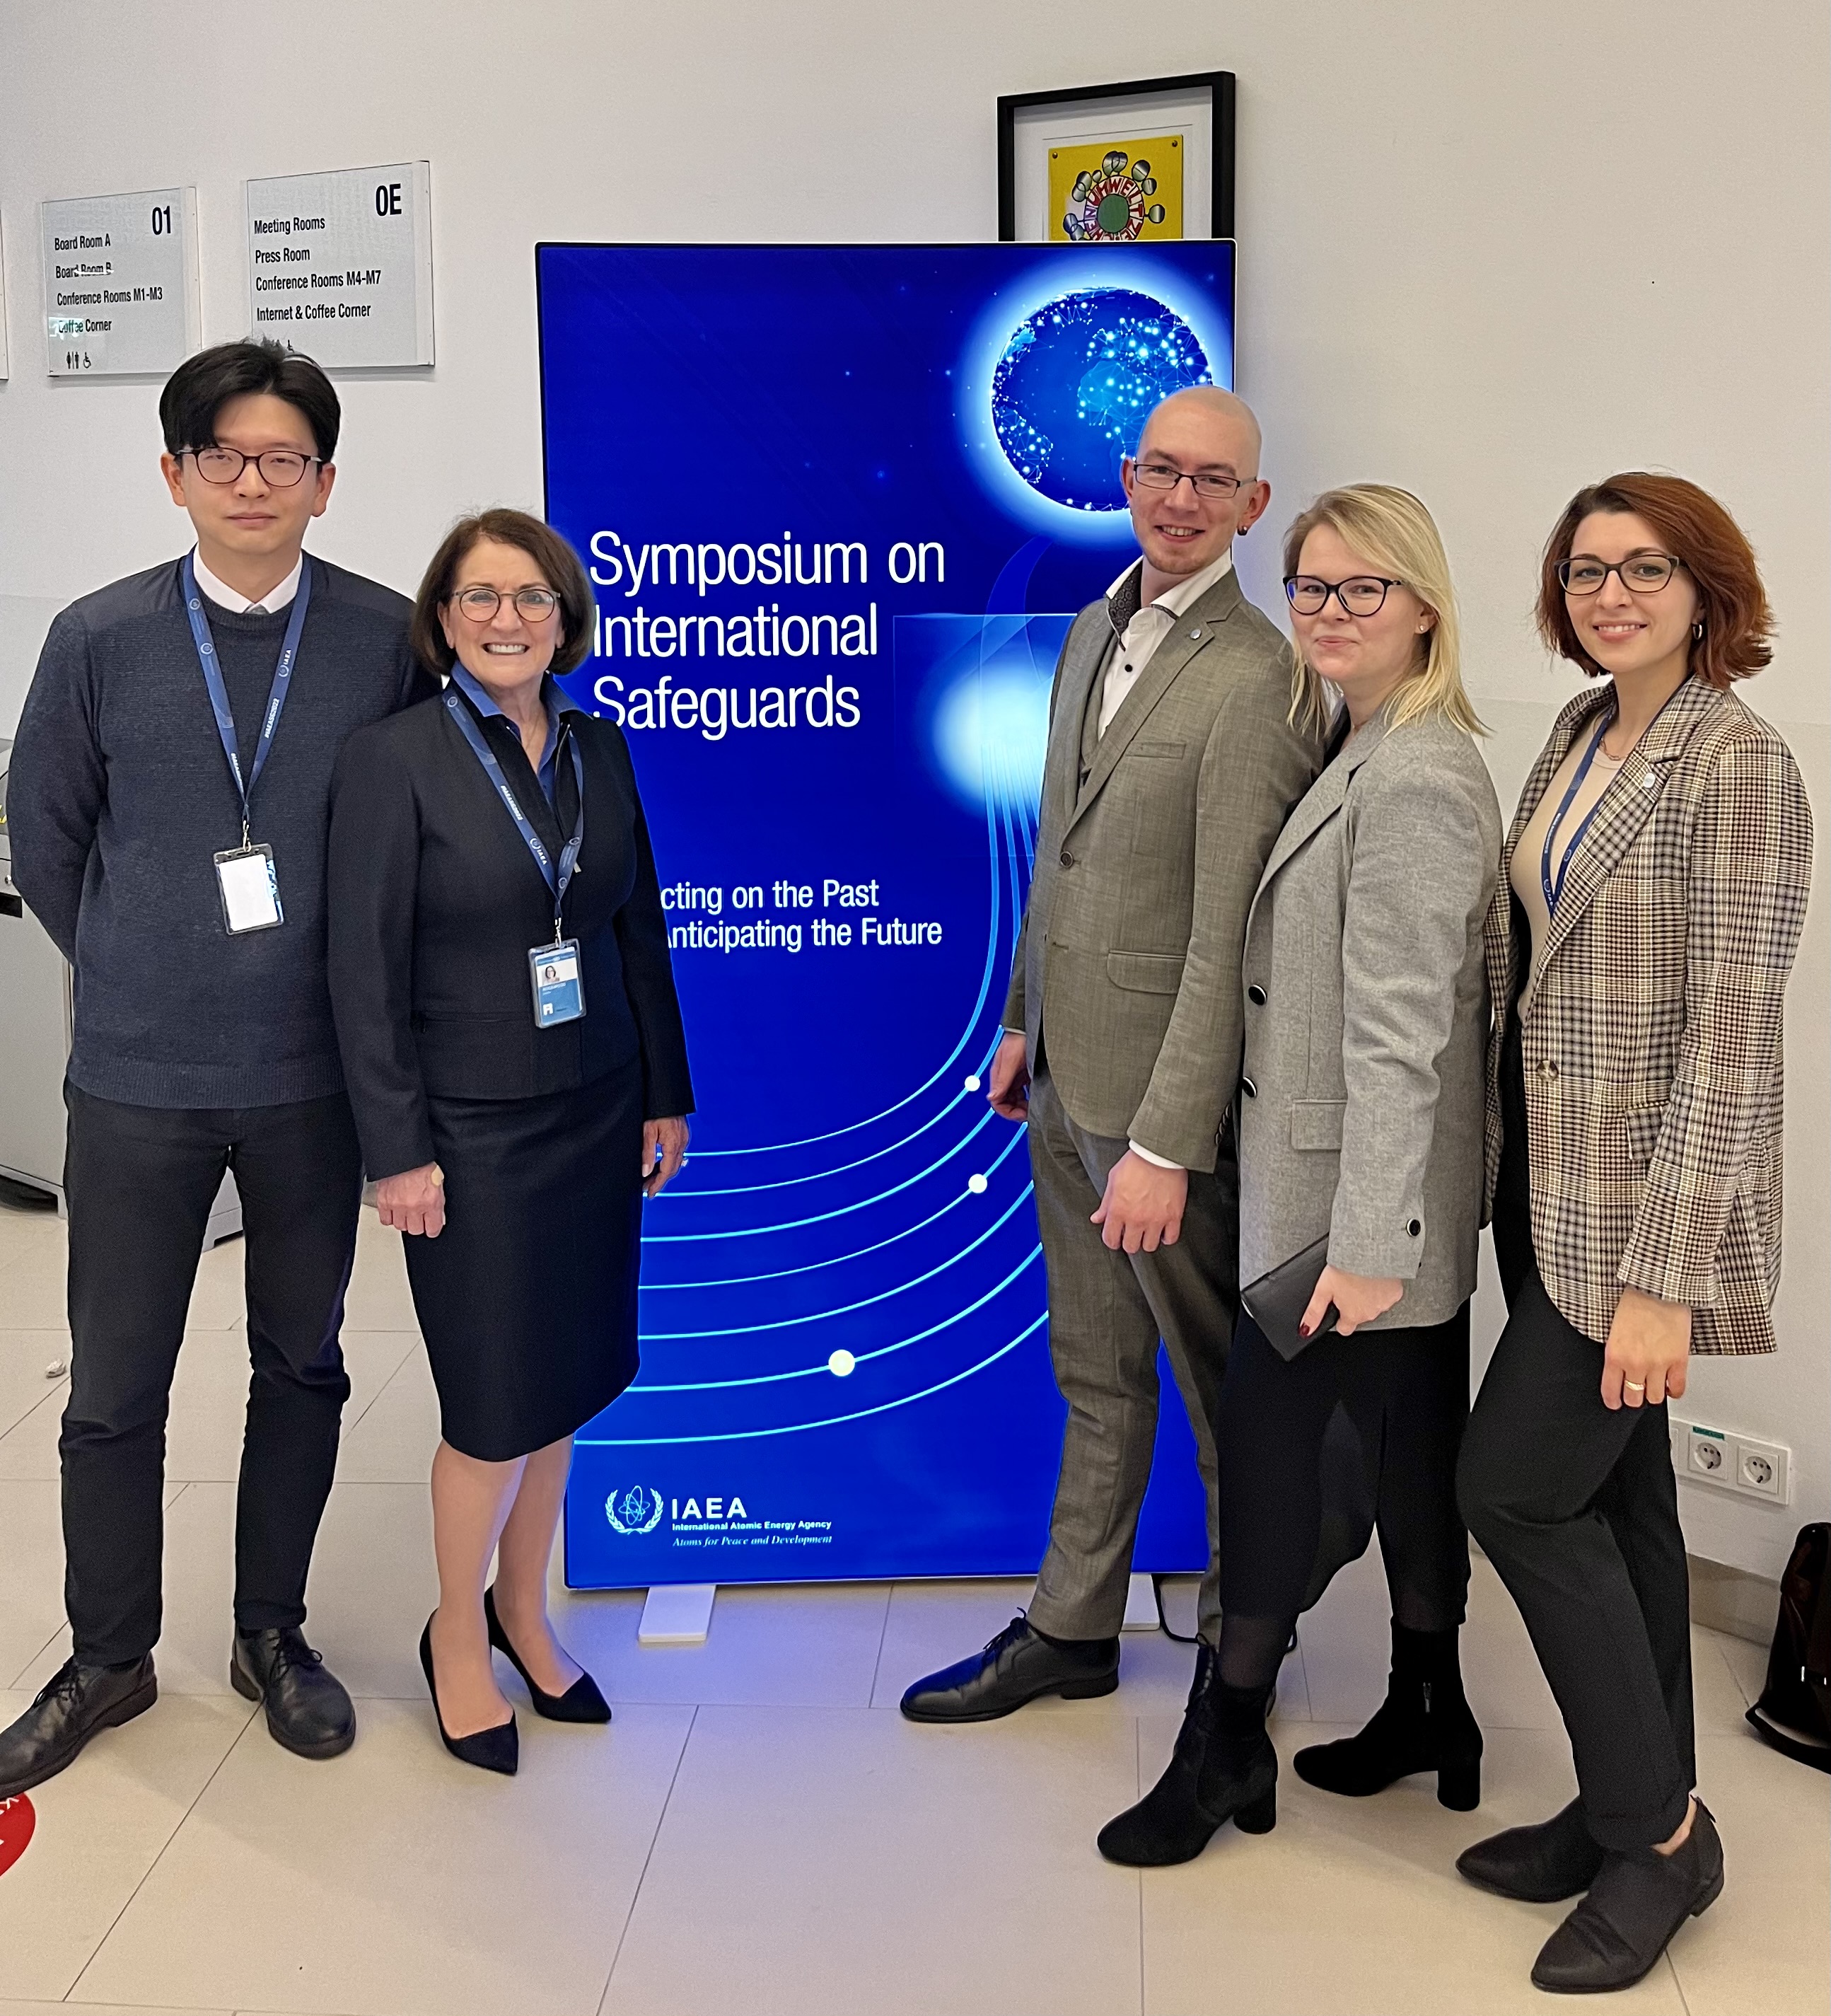 ONN team, Tianran Xu, Veronika Bedenko, and Valeria Hesse, with colleagues from the Vienna expert community, Laura Rockwood and Noah Mayhew.